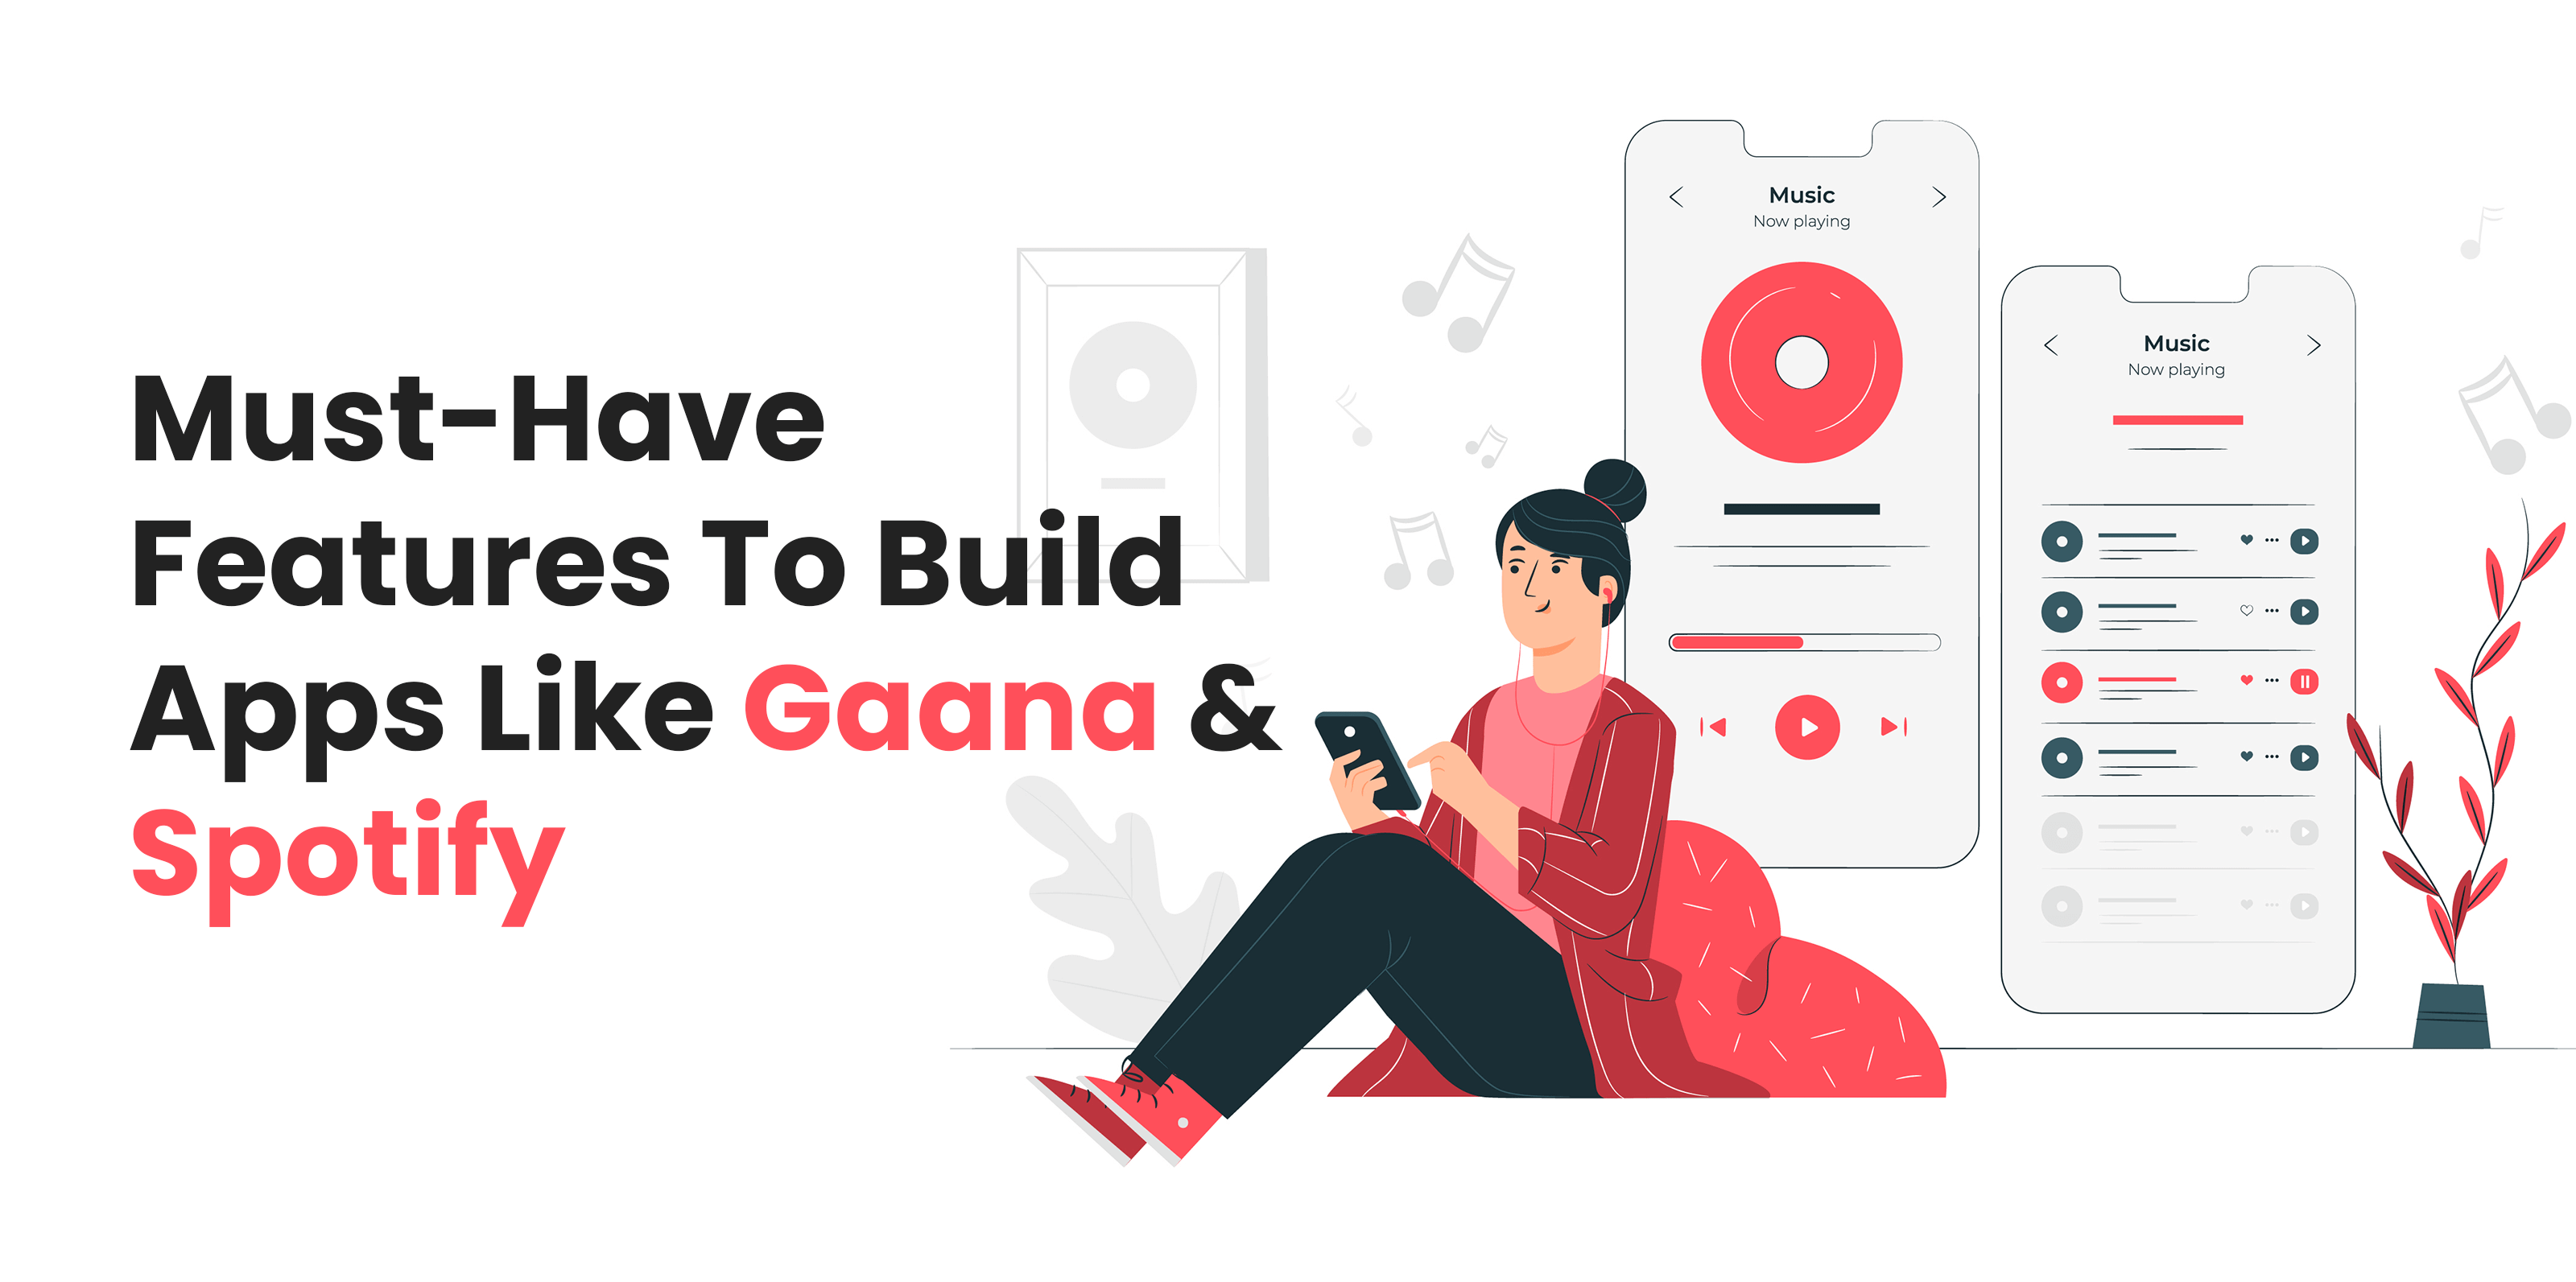 Must-Have-Features-To-Build-Apps-Like-Gaana-and-Spotify